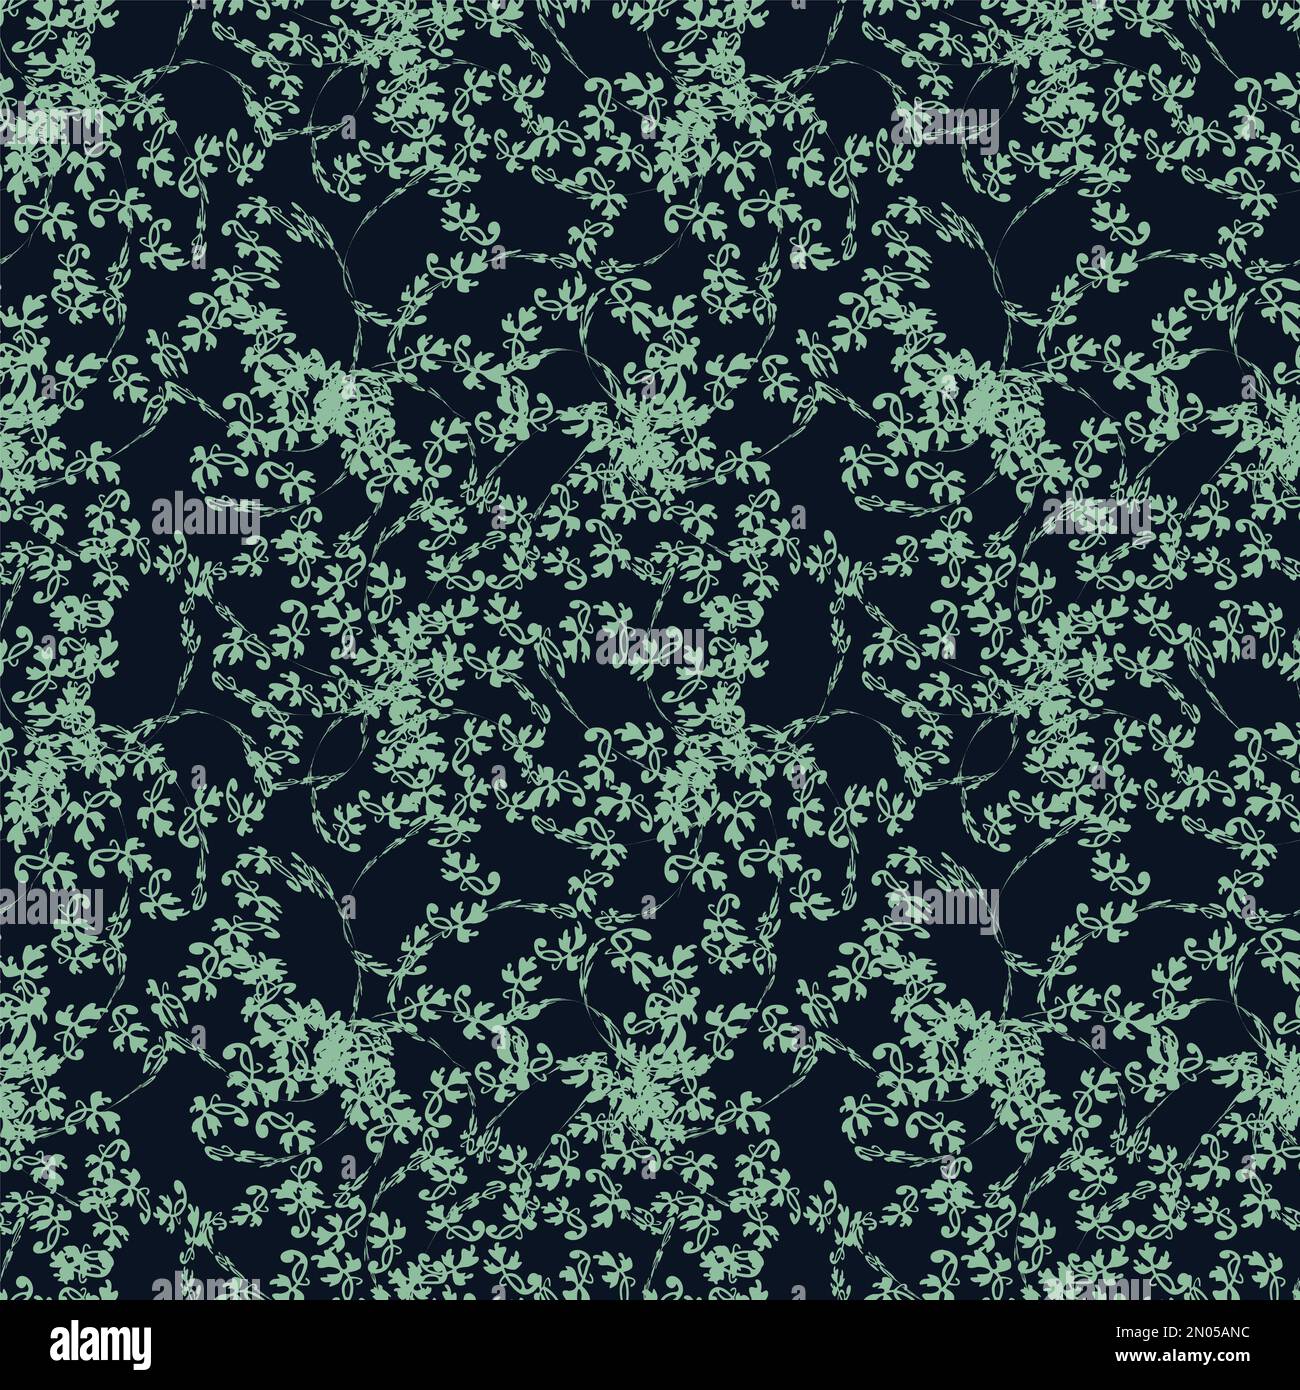 Seamless simple cute pattern of green curled design elements like plants on navy background.Endless ornament.Colourful backdrop for fabric,textile Stock Photo